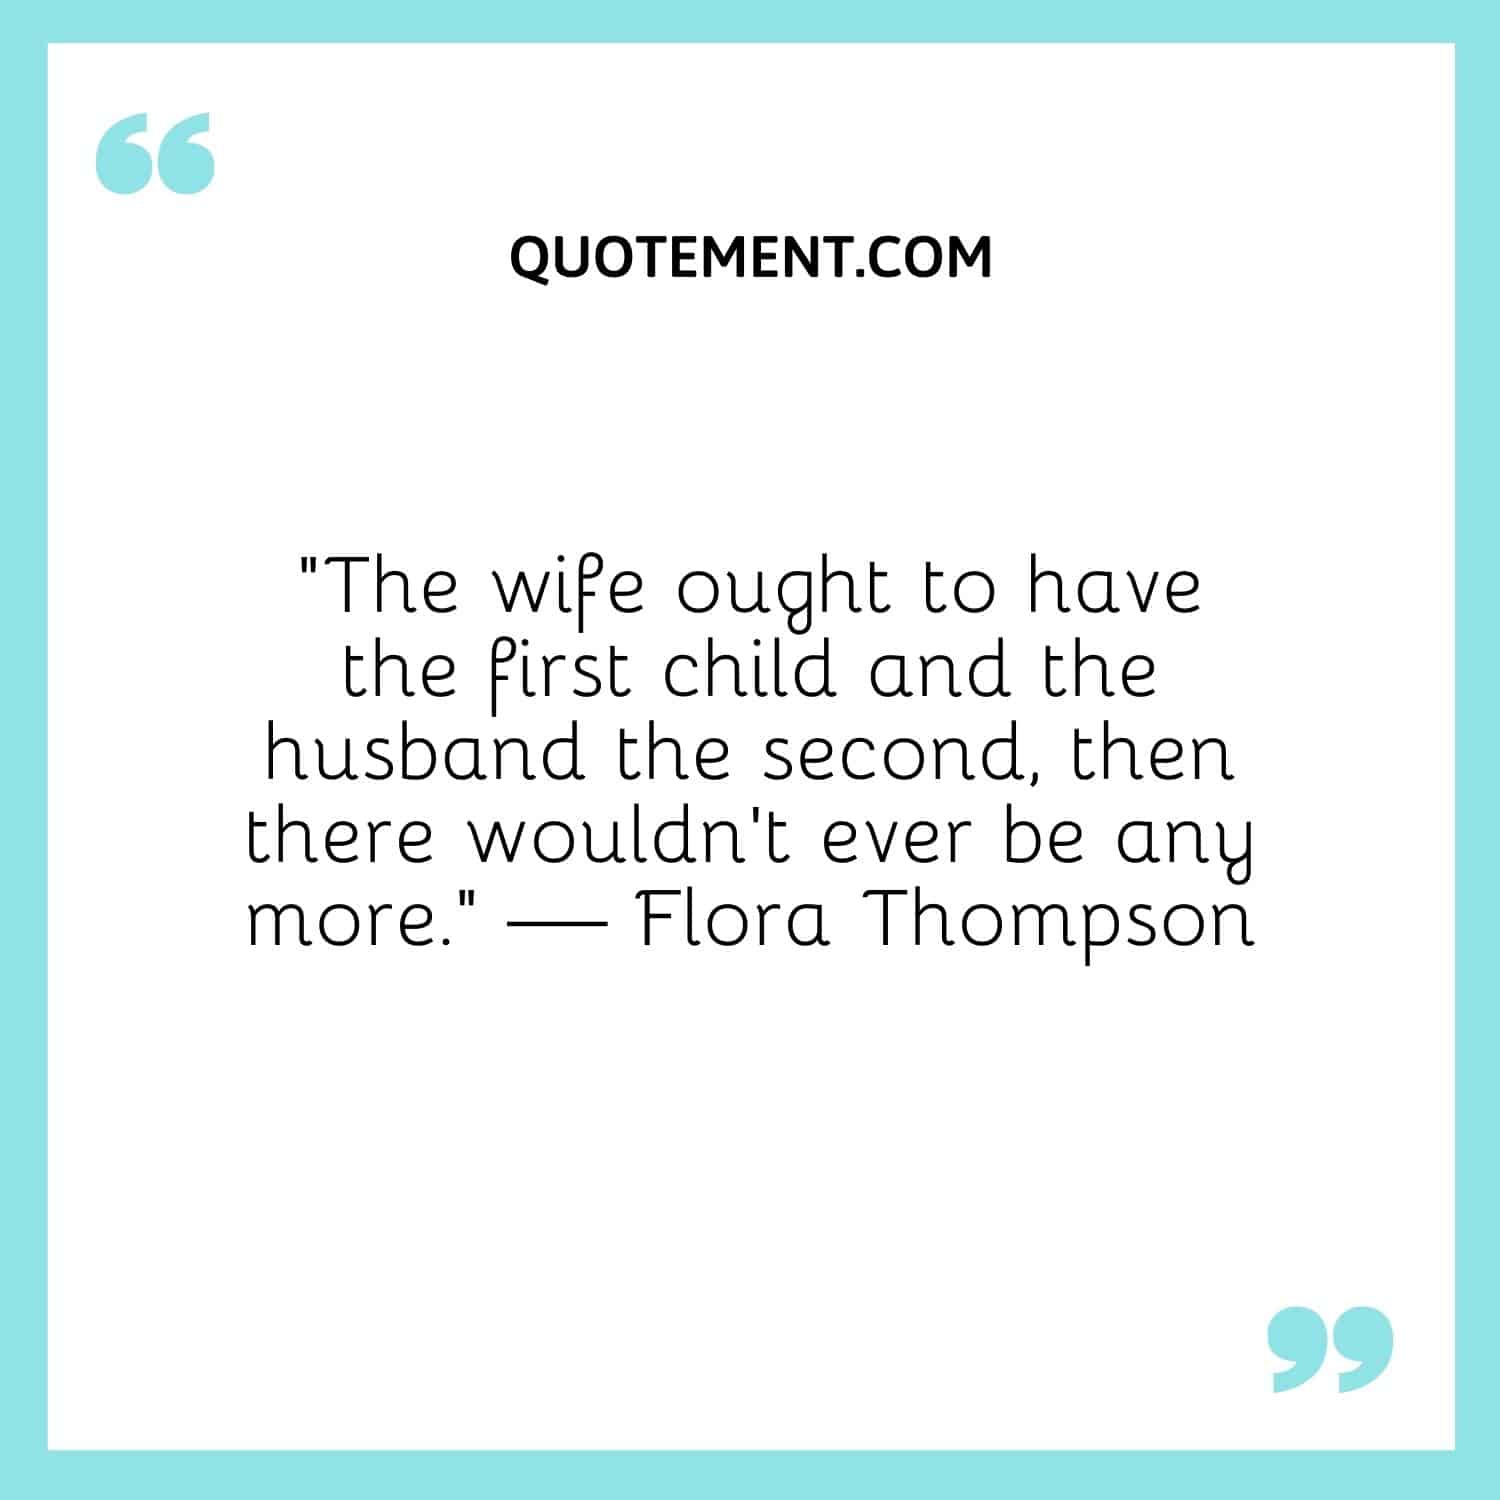 The wife ought to have the first child and the husband the second, then there wouldn’t ever be any more